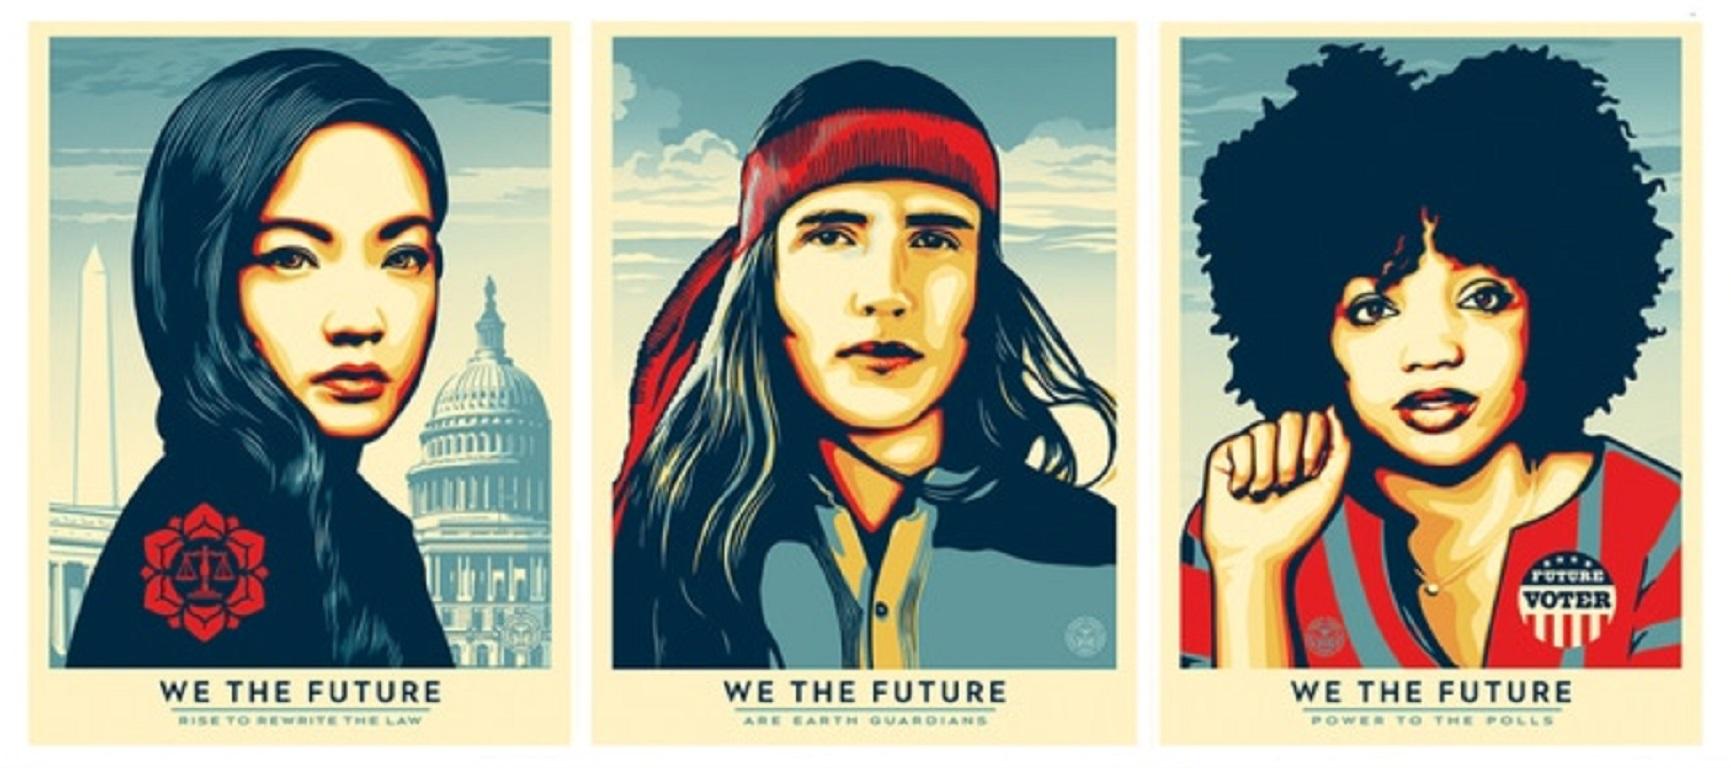 Shepard Fairey - Earth Guardians, Rewrite the Law, Power to the Polls - Complete 3 Print Set

Description:

Presenting a powerful trio of prints by the iconic American contemporary artist, Shepard Fairey. This set, comprising "Earth Guardians,"